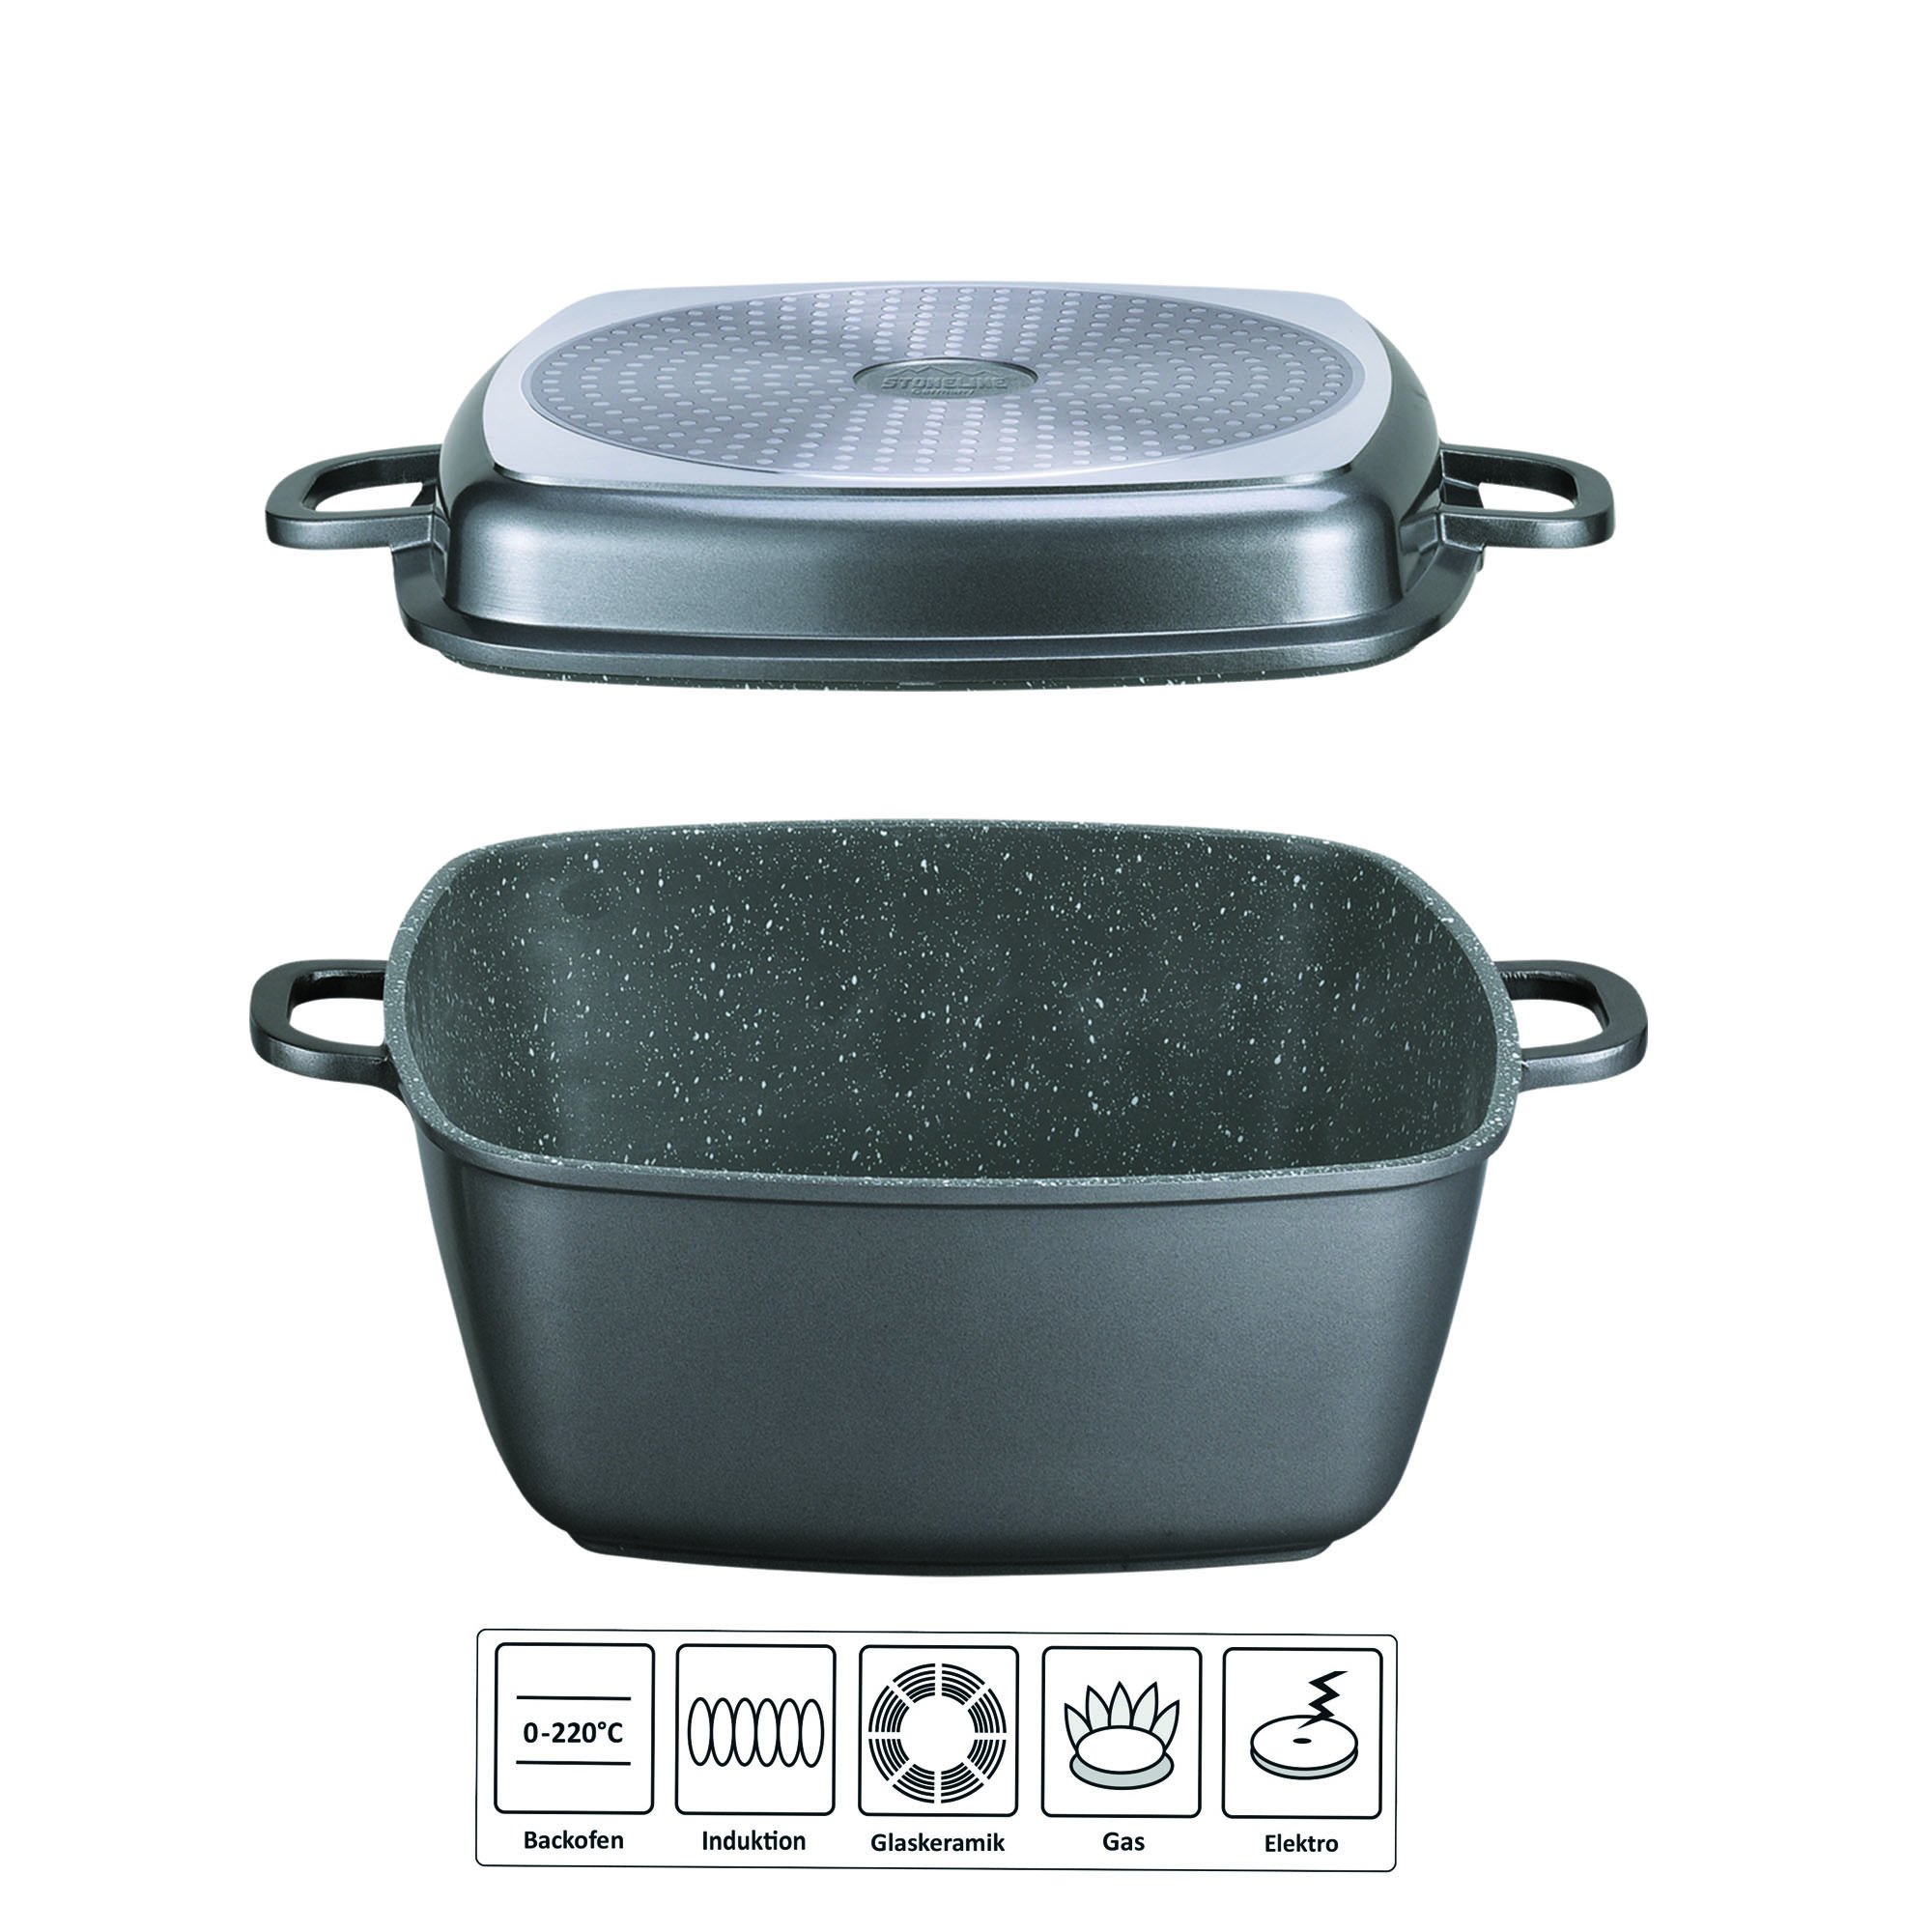 STONELINE® Square Roaster Serving Pan 28 cm, with Aroma Lid | Steamer, Deep Fryer